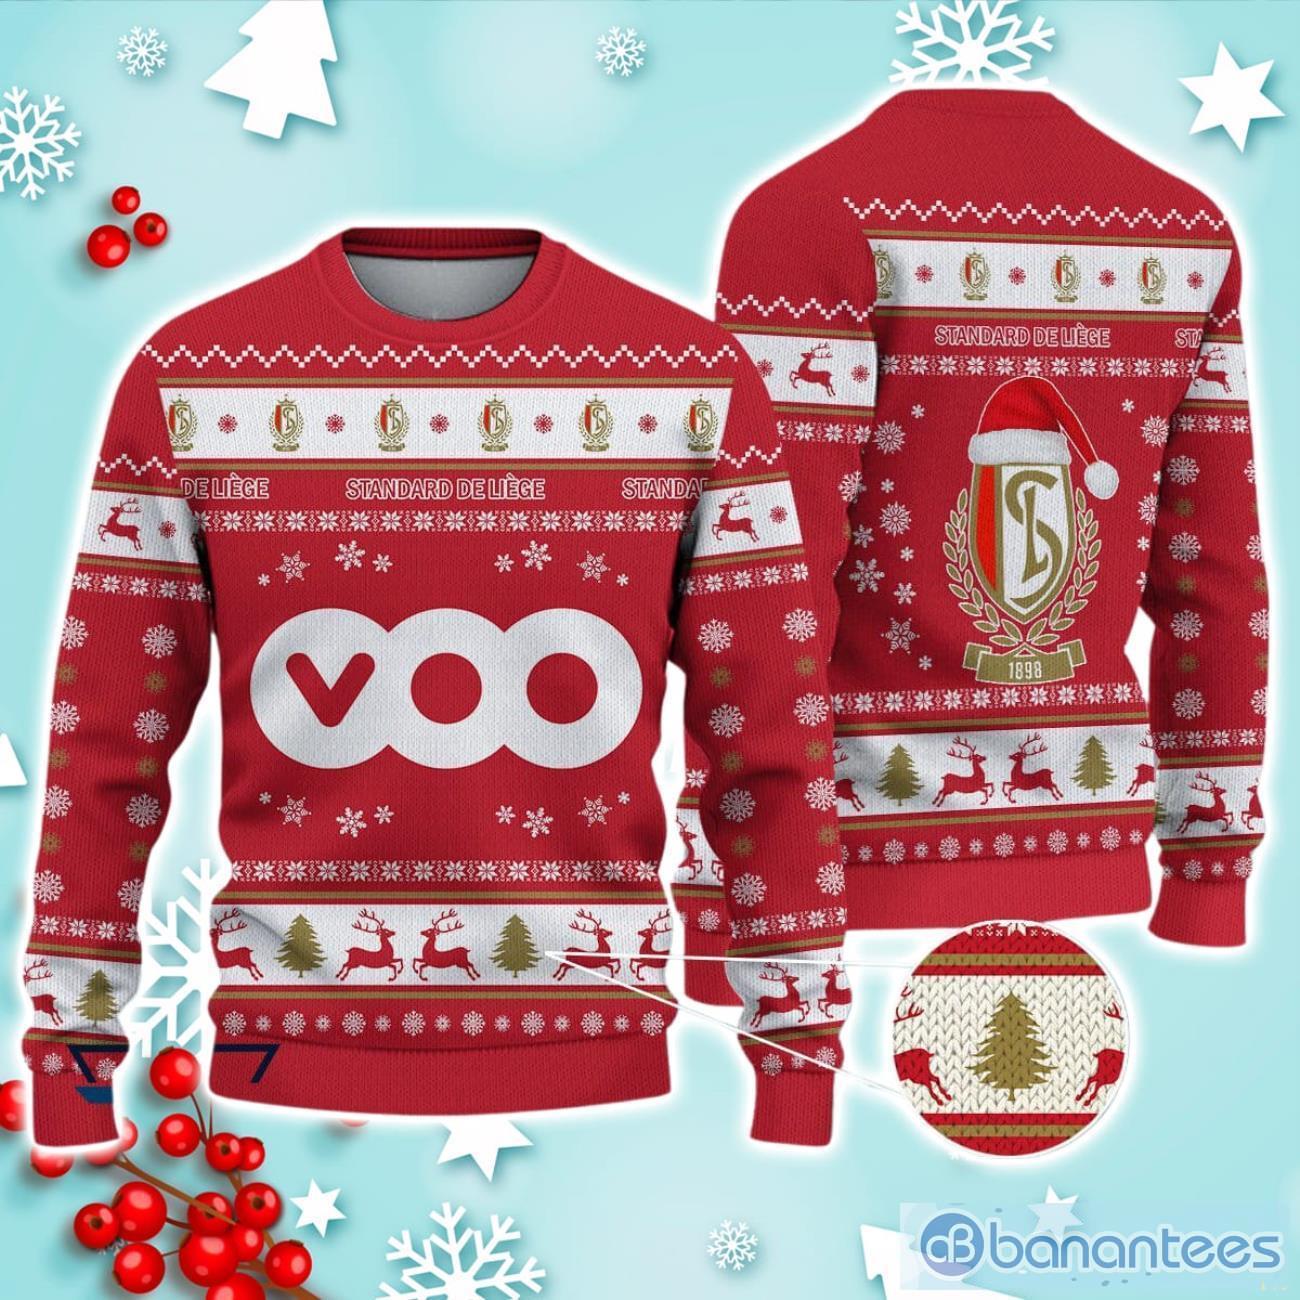 Standard Liege Ugly Christmas Sweater Great Gift For Fans Product Photo 1